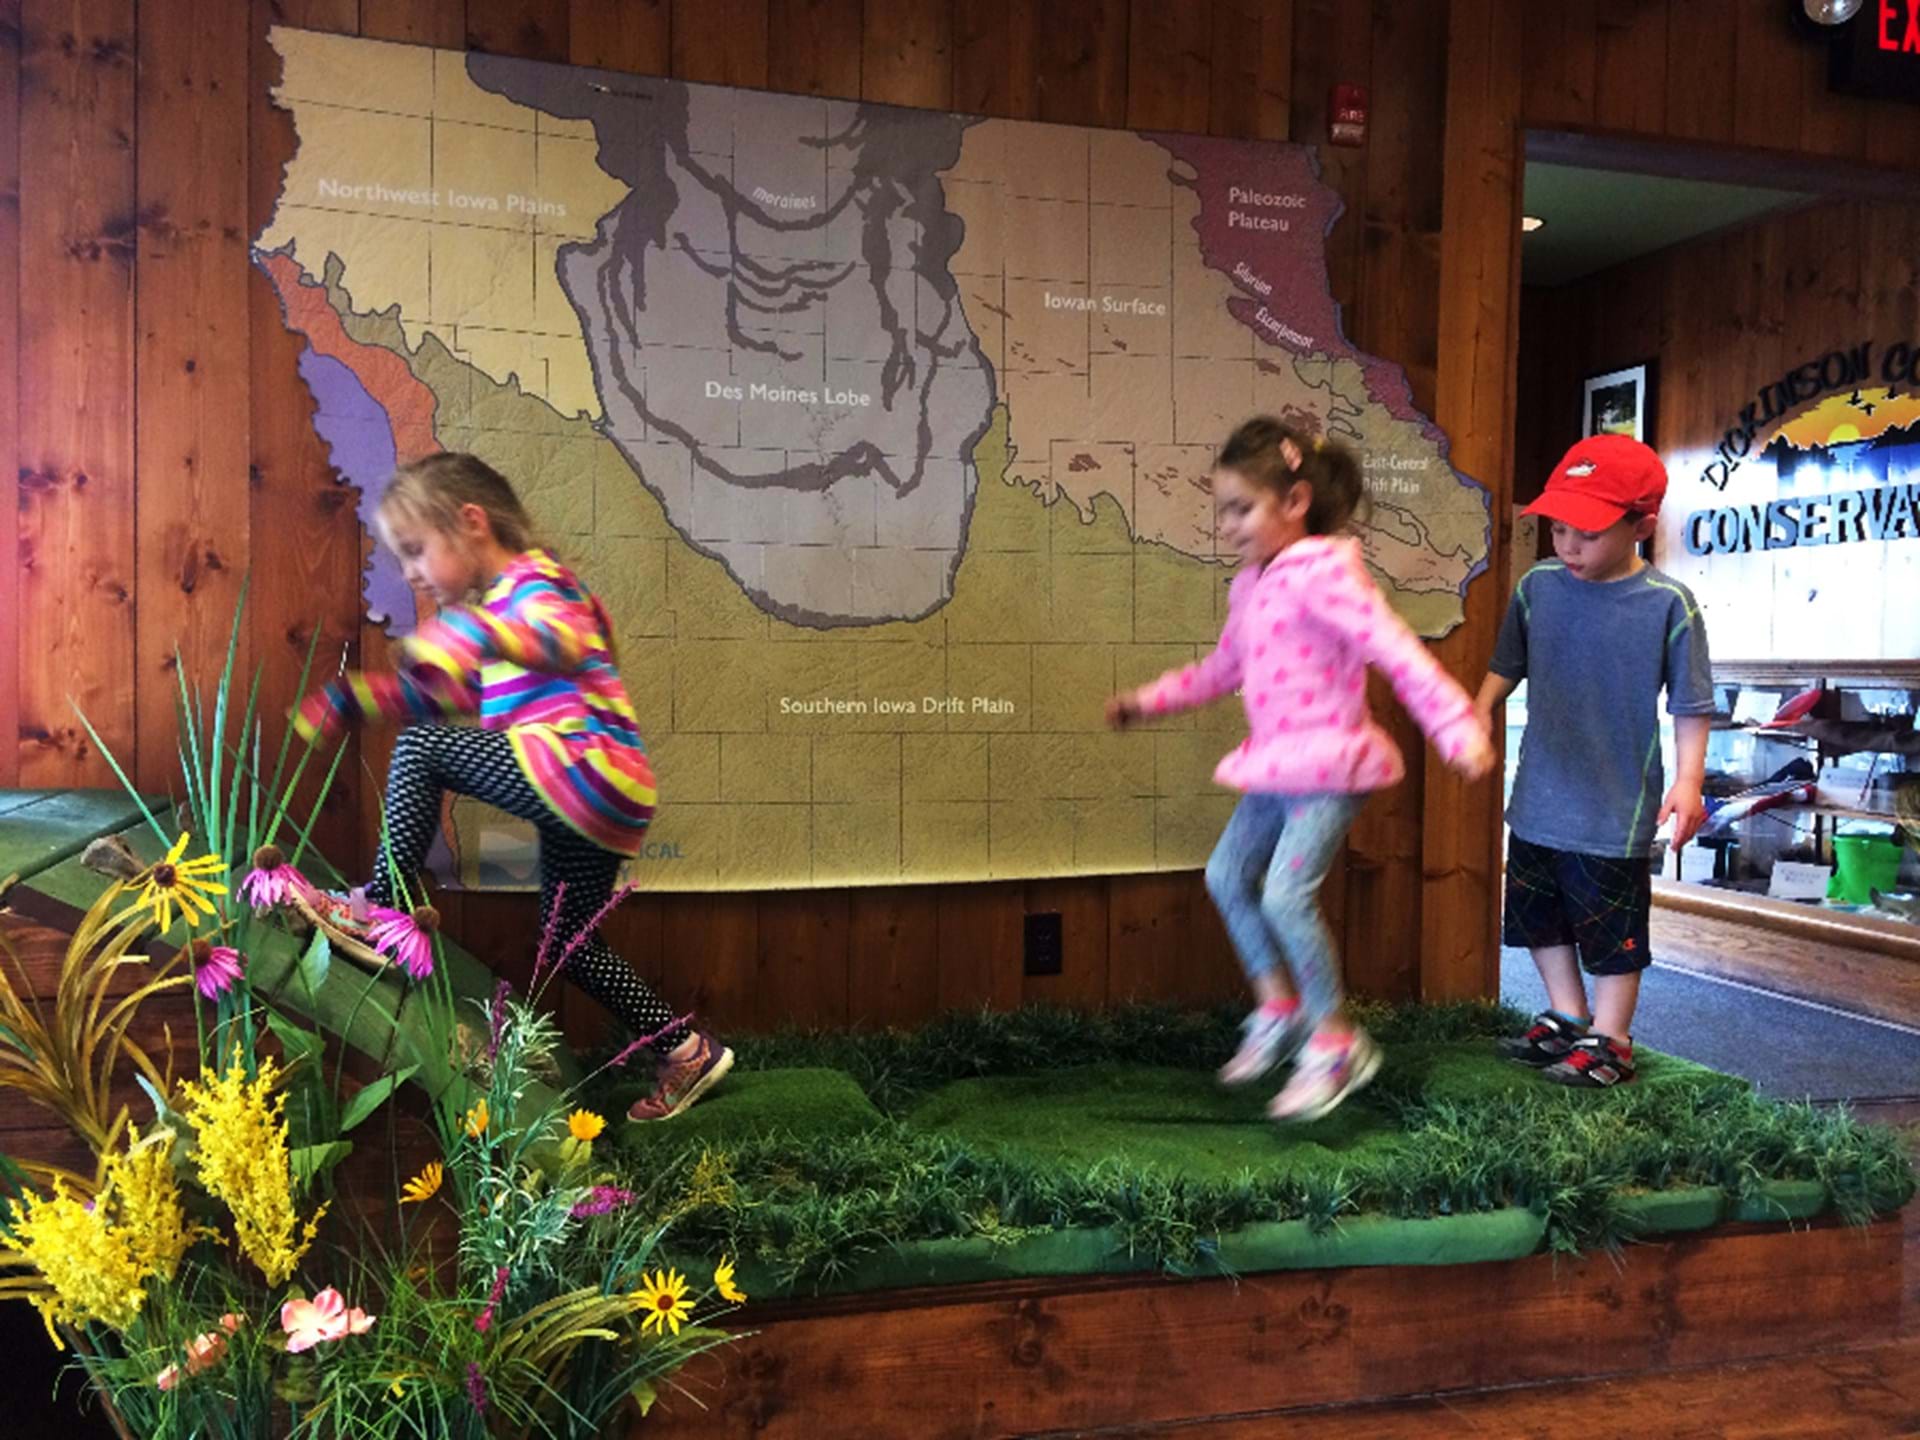 Interact with exhibits, like jumping on a fen or climbing a glacial kame in the glacial landmark tour area.